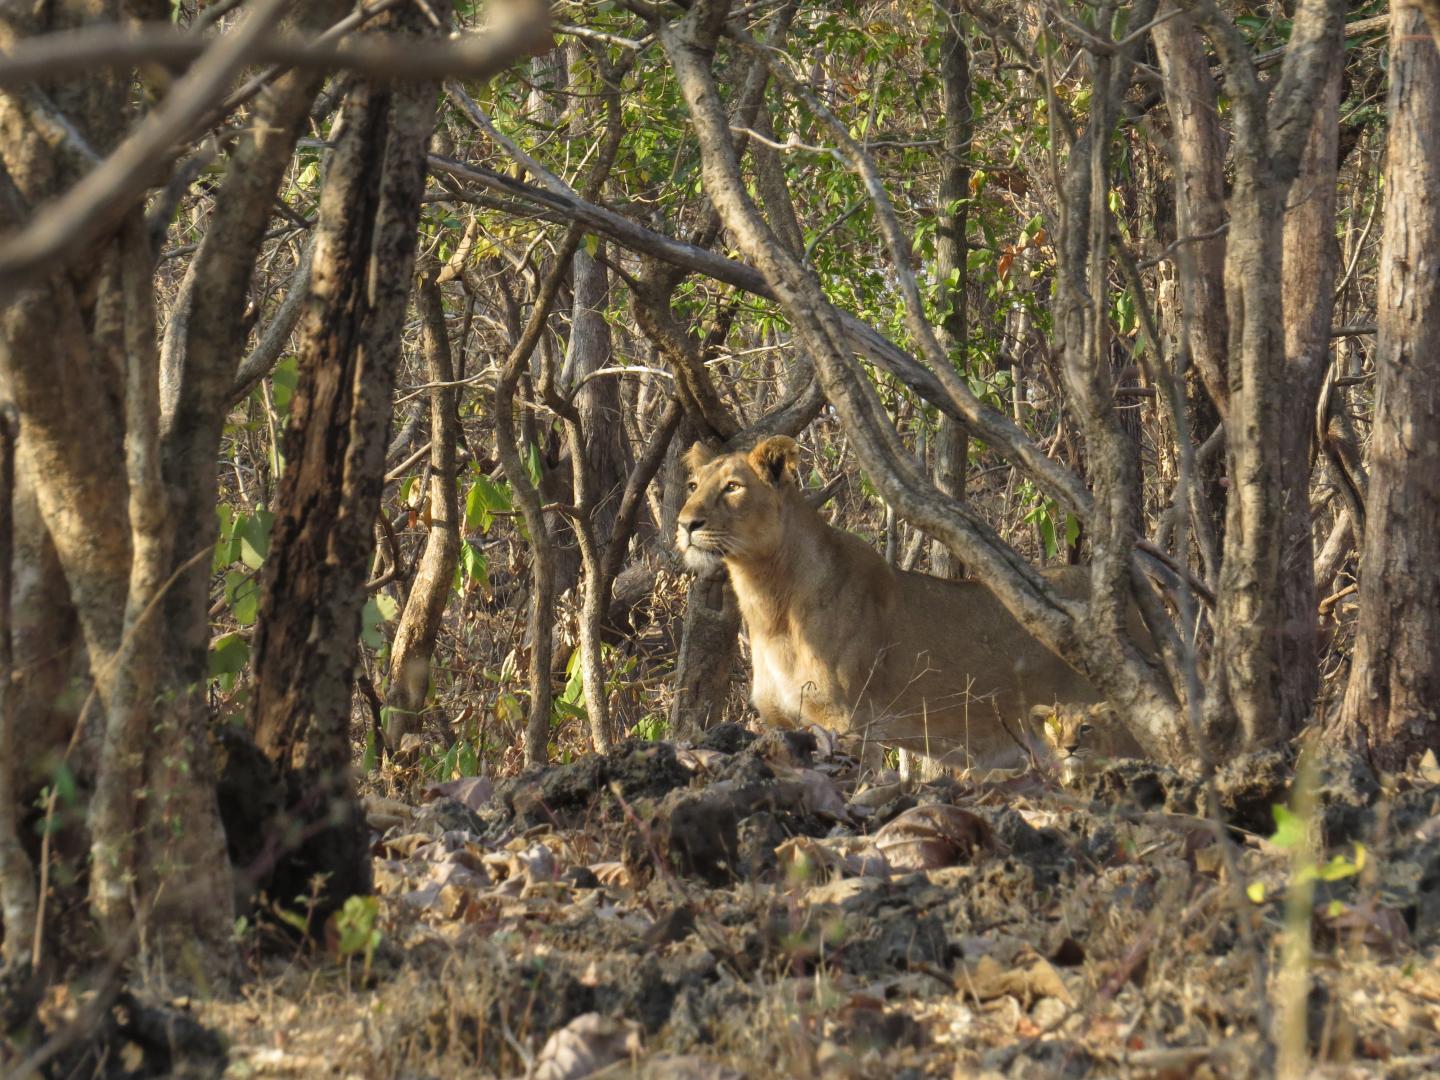 Improving Assessments of an Endangered Lion Population in India